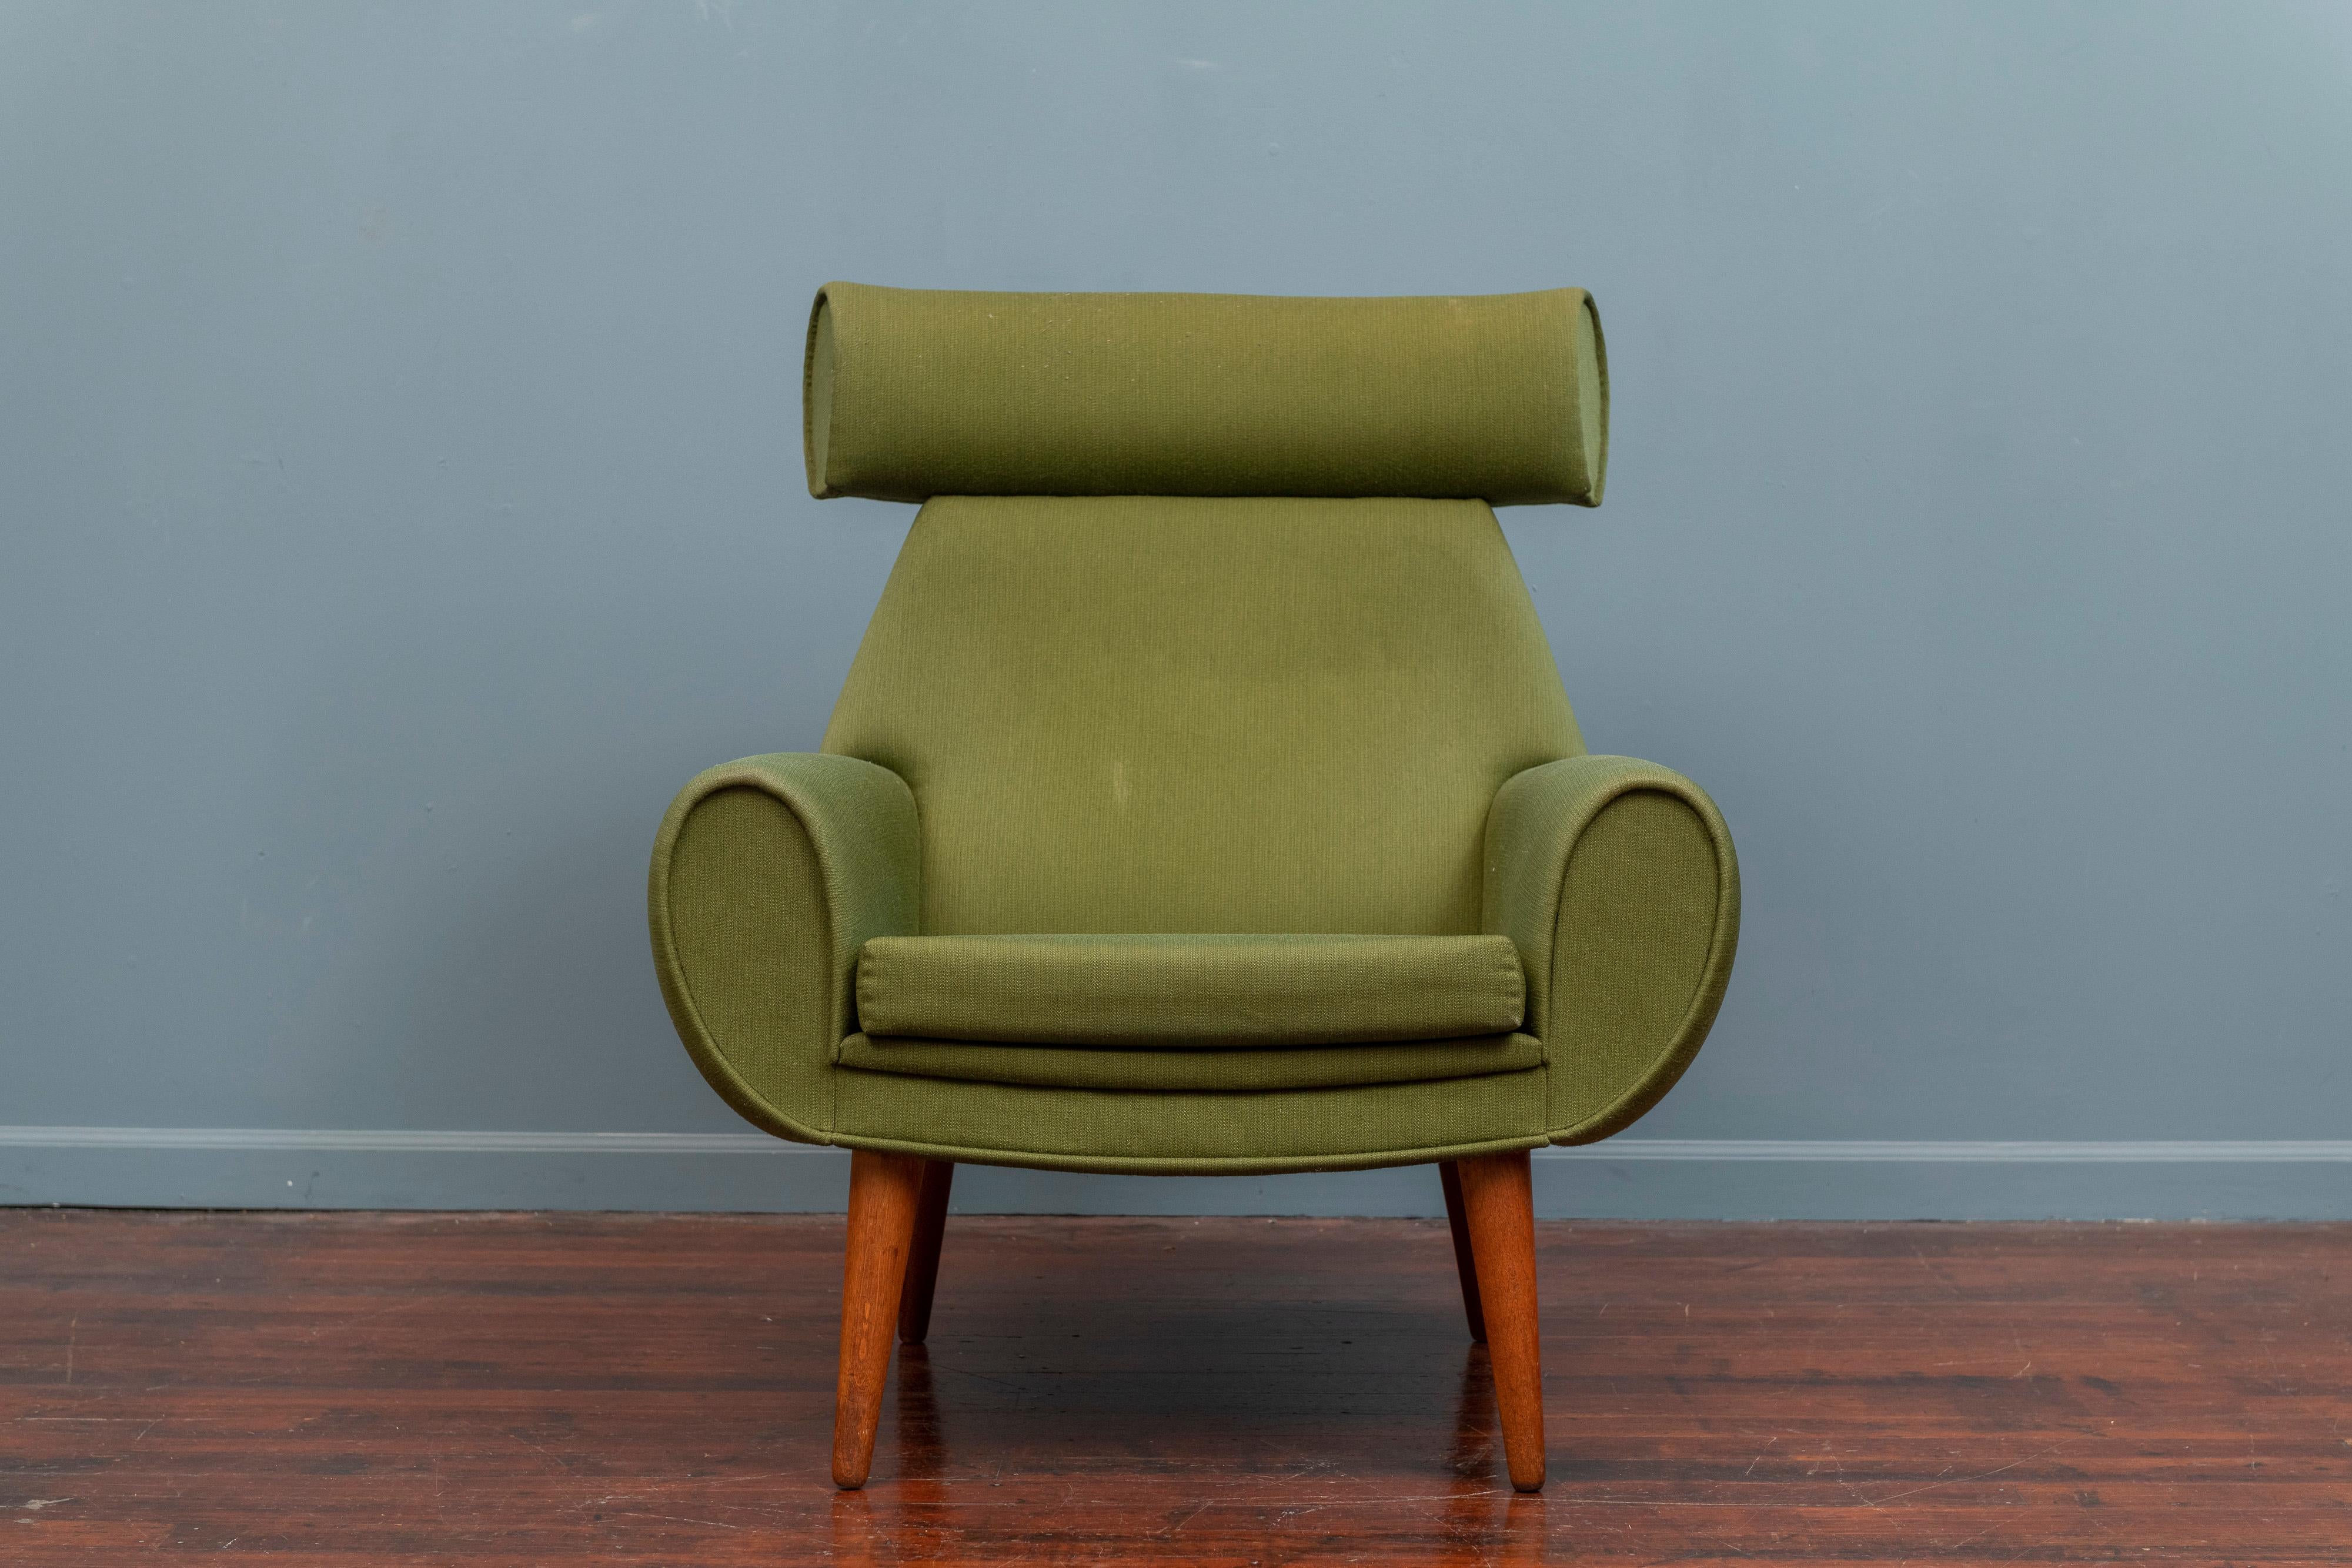 Scandinavian Modern large scale lounge chair, an unusual design by Kurt Ostervig, Denmark. 
The lounge chair is ready to use as-is or reupholster it in C.O.M. on tapering oak legs.